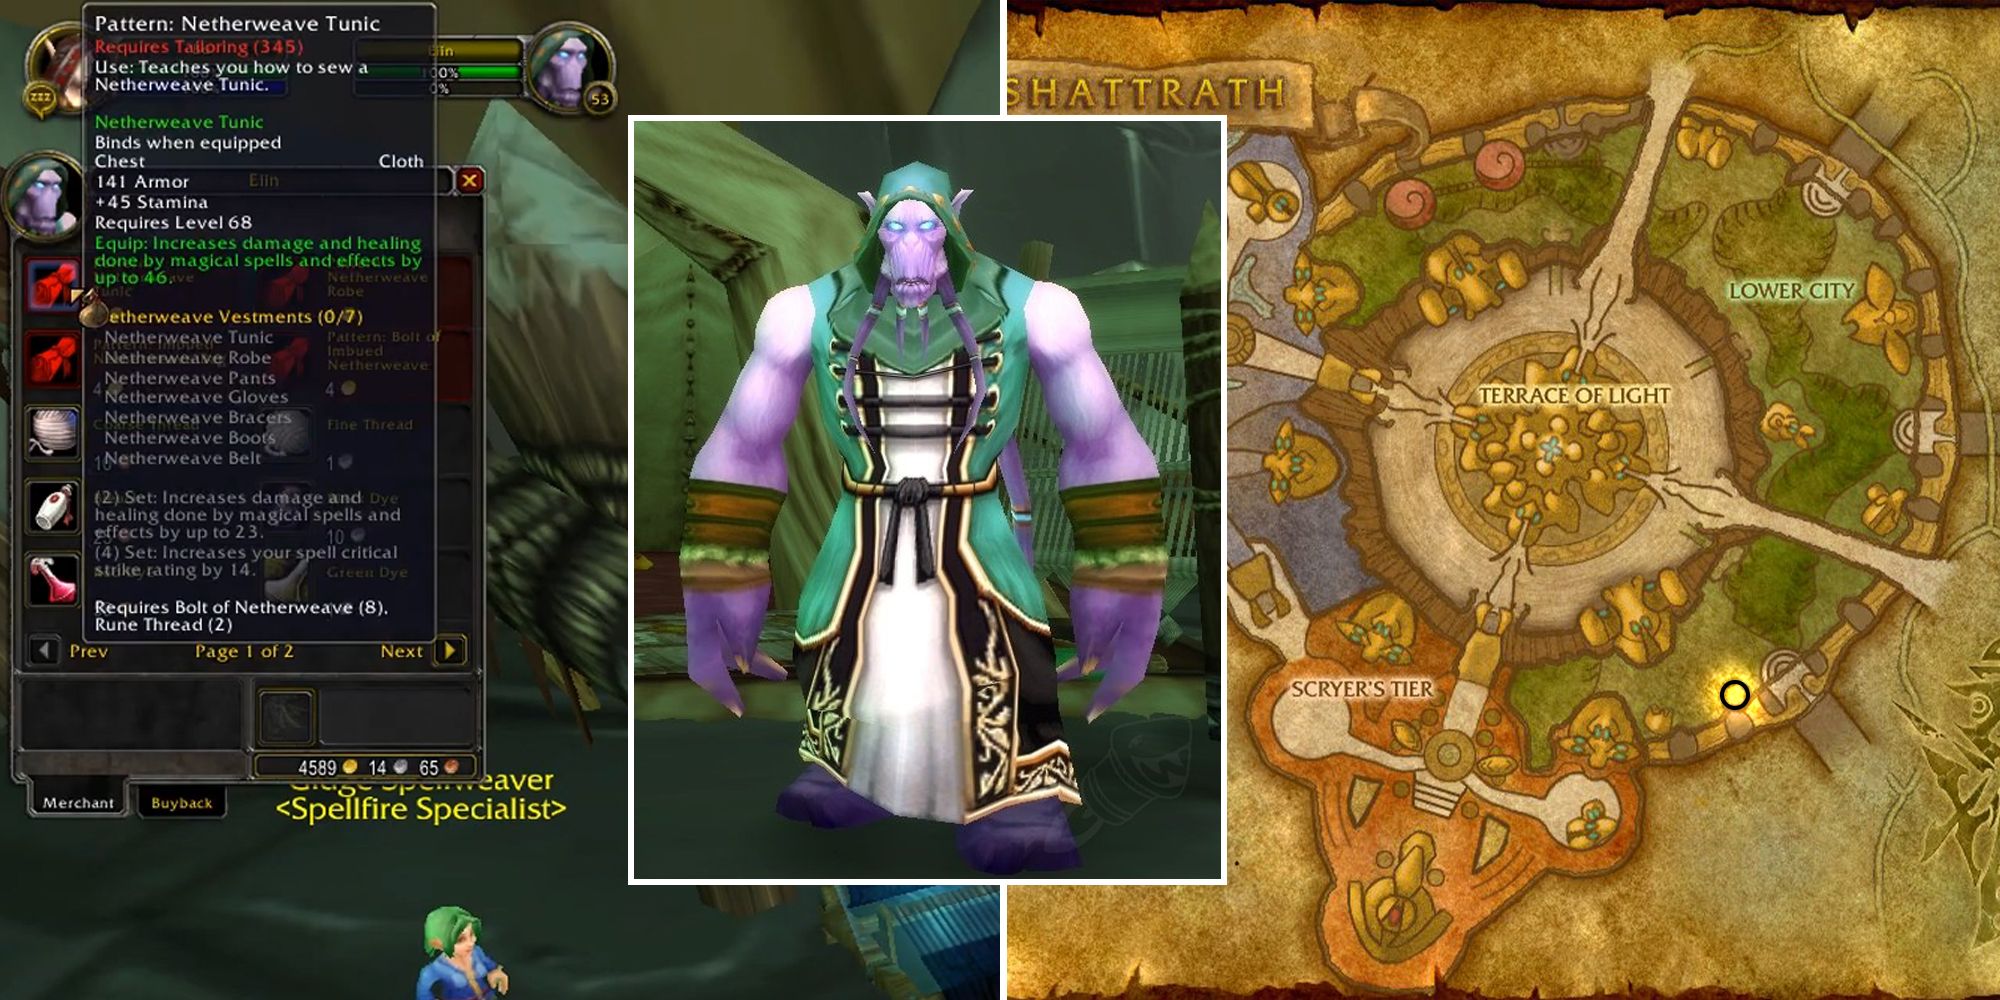 screenshot of the location of eiin in wow wotlk and map location in shattrath